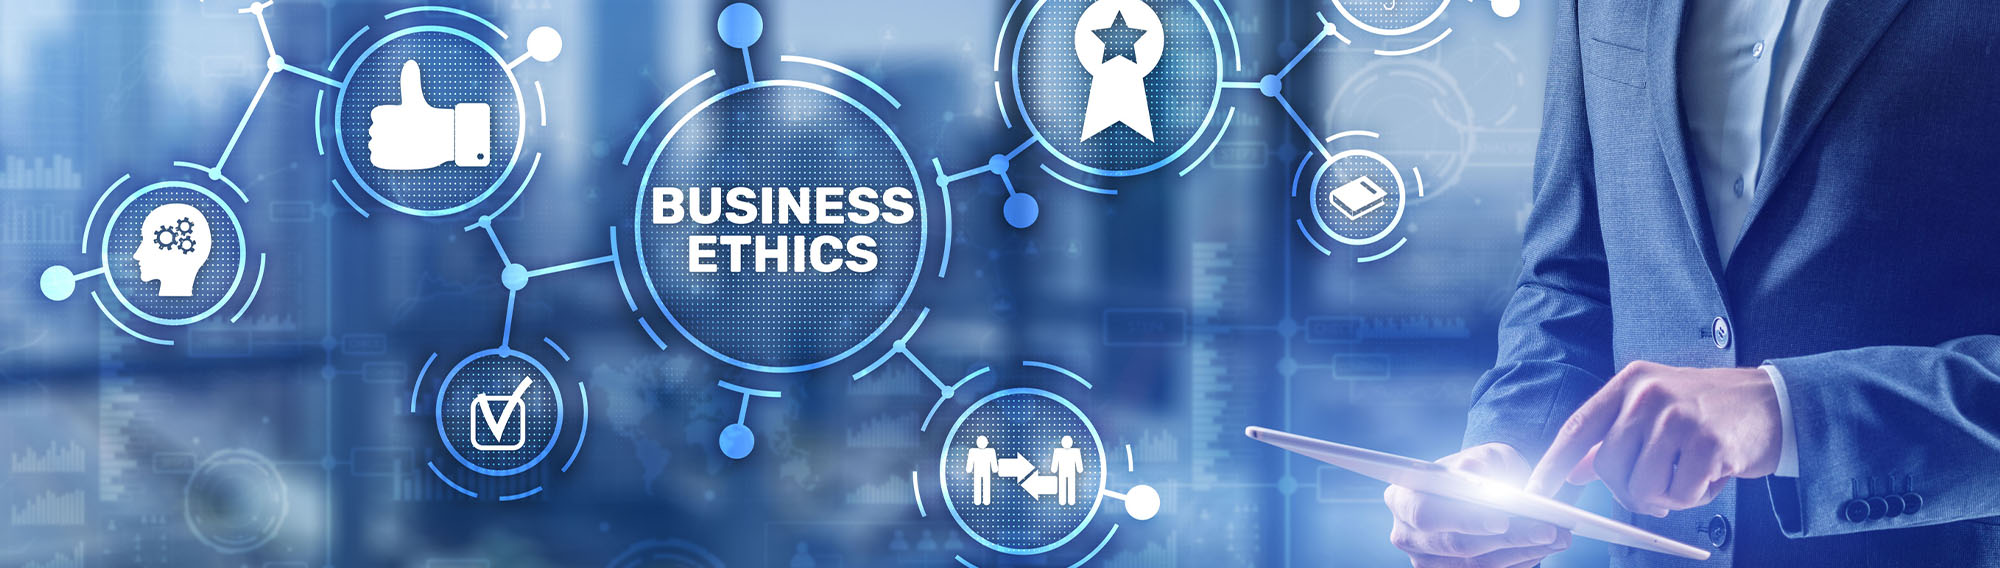 A graphic that says Business ethics and has icons of thumbs up, a thinking brain, a checkmark, etc.